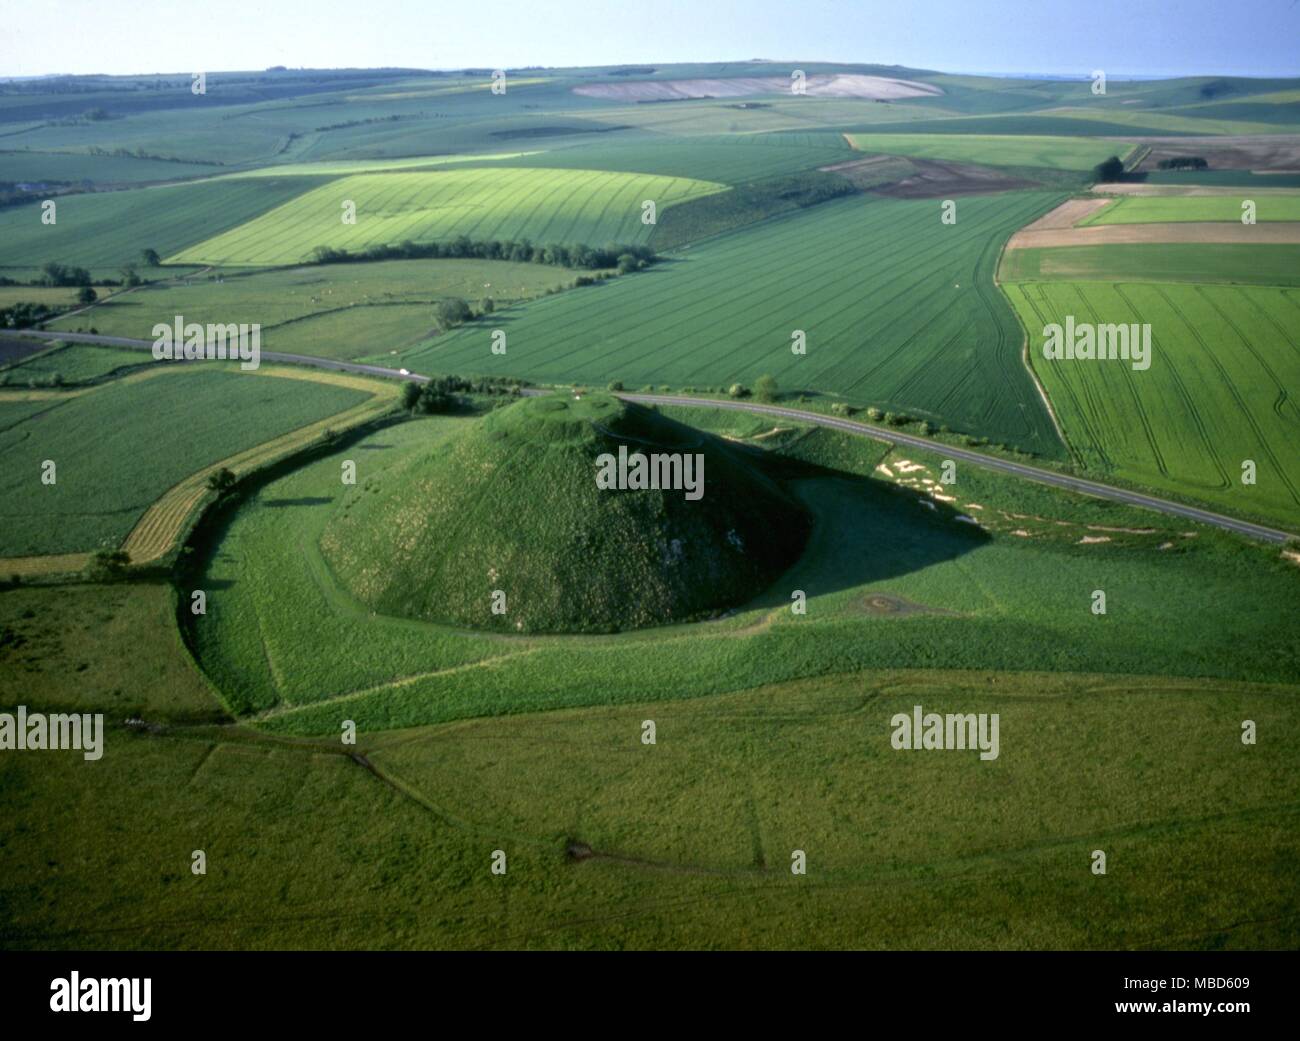 Silbury Hill This man made mound is 130 feet high and covers just over 5 acres. The flat top is 100 feet across. Constructed circa 2100 BC and clearly linked with nearby Avebury circles . Stock Photo